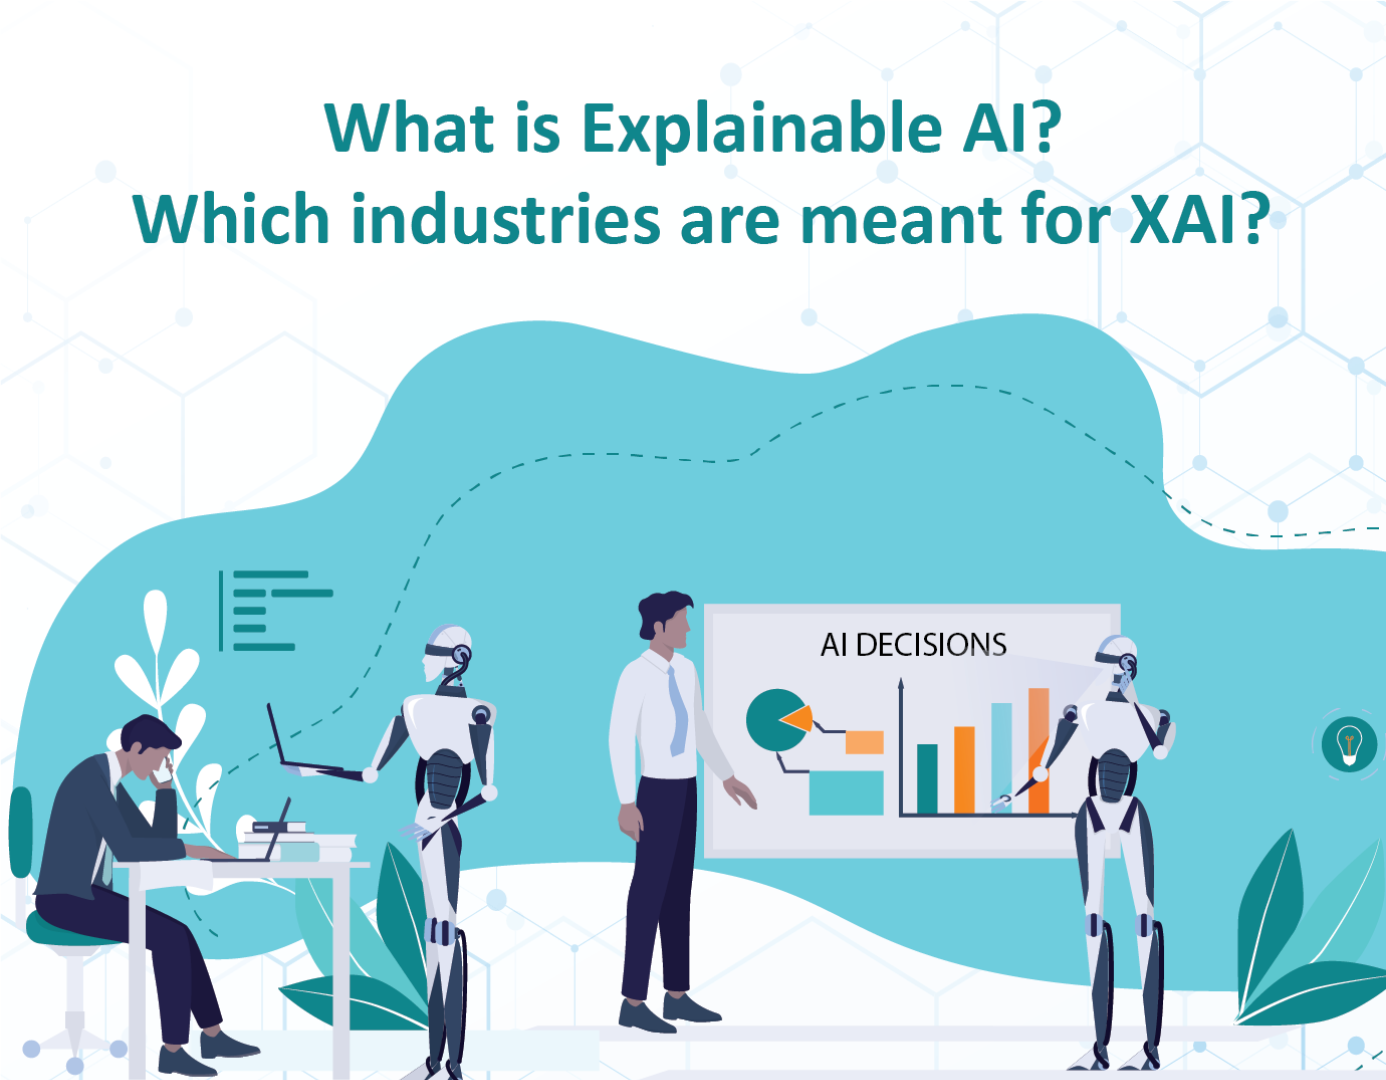 What is Explainable AI? Which industries are meant for XAI?